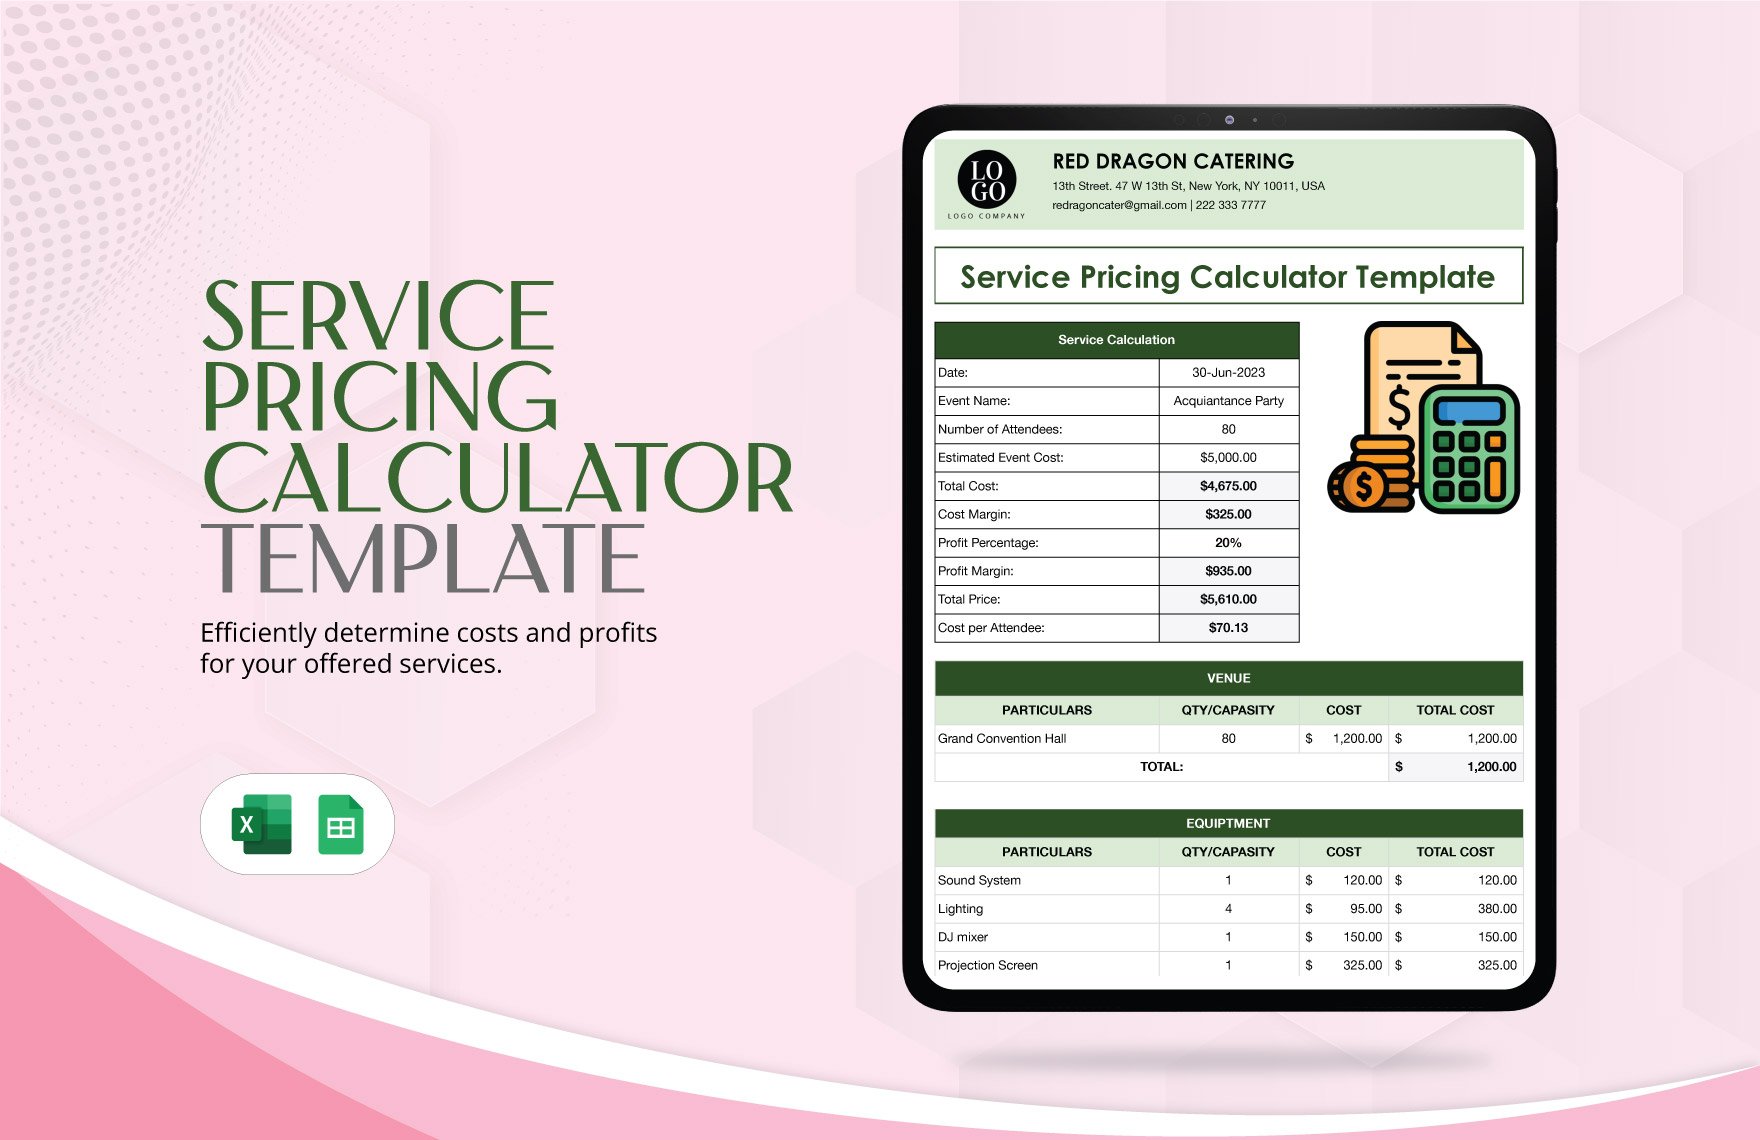 Service Pricing Calculator Template in Excel, Google Sheets